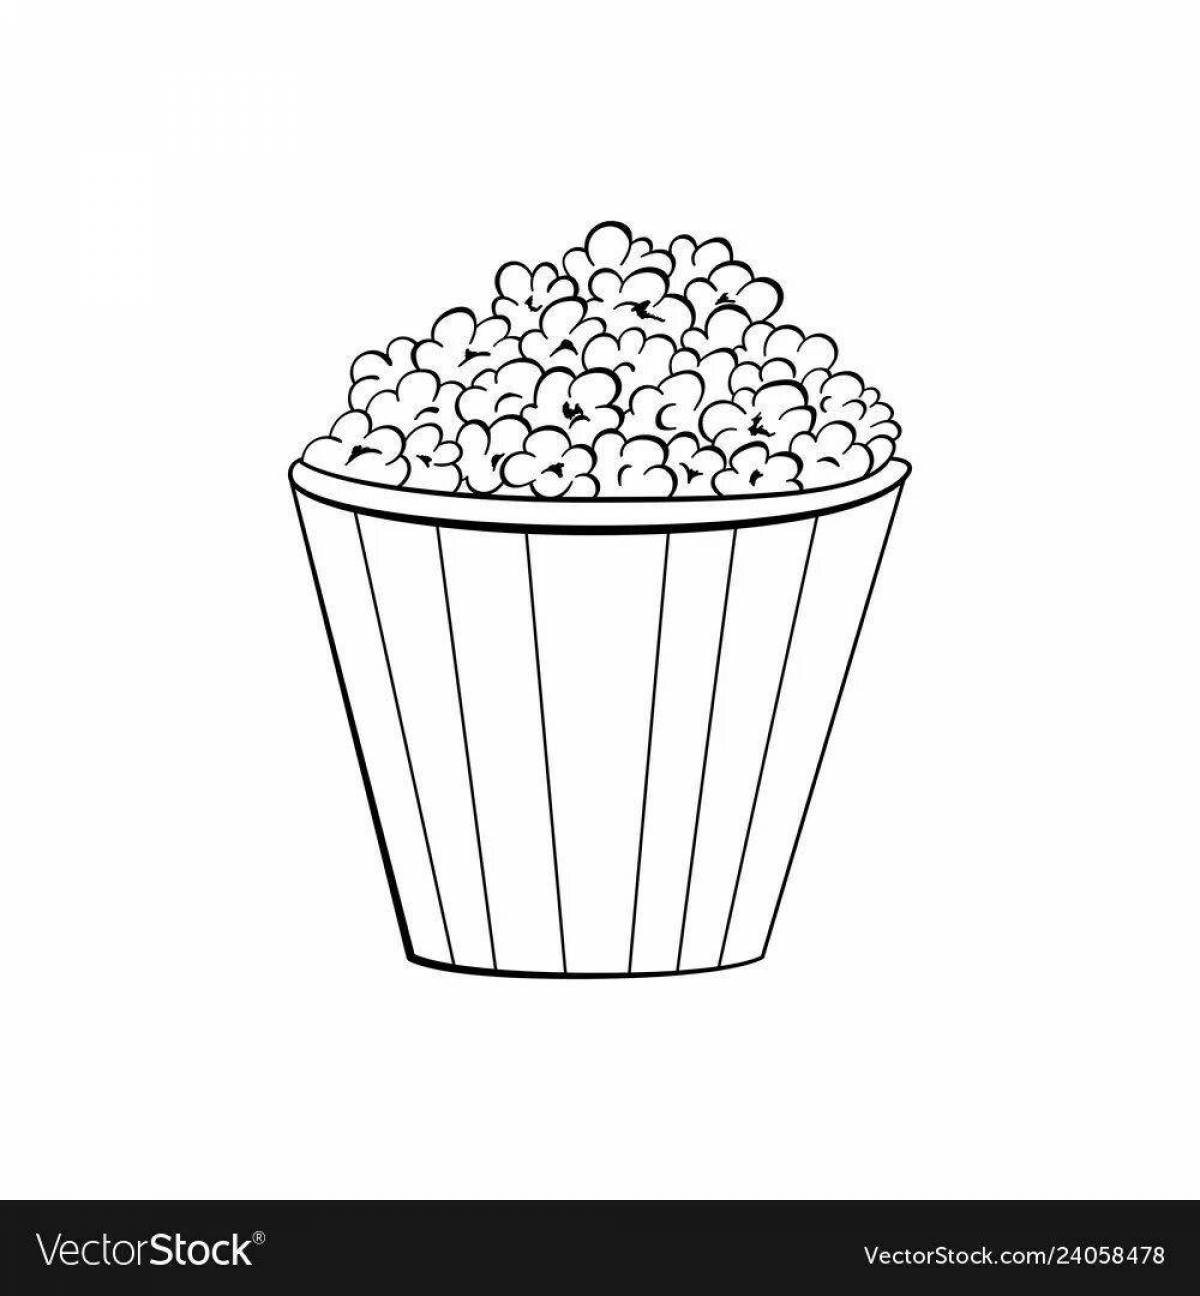 Great popcorn coloring book for kids